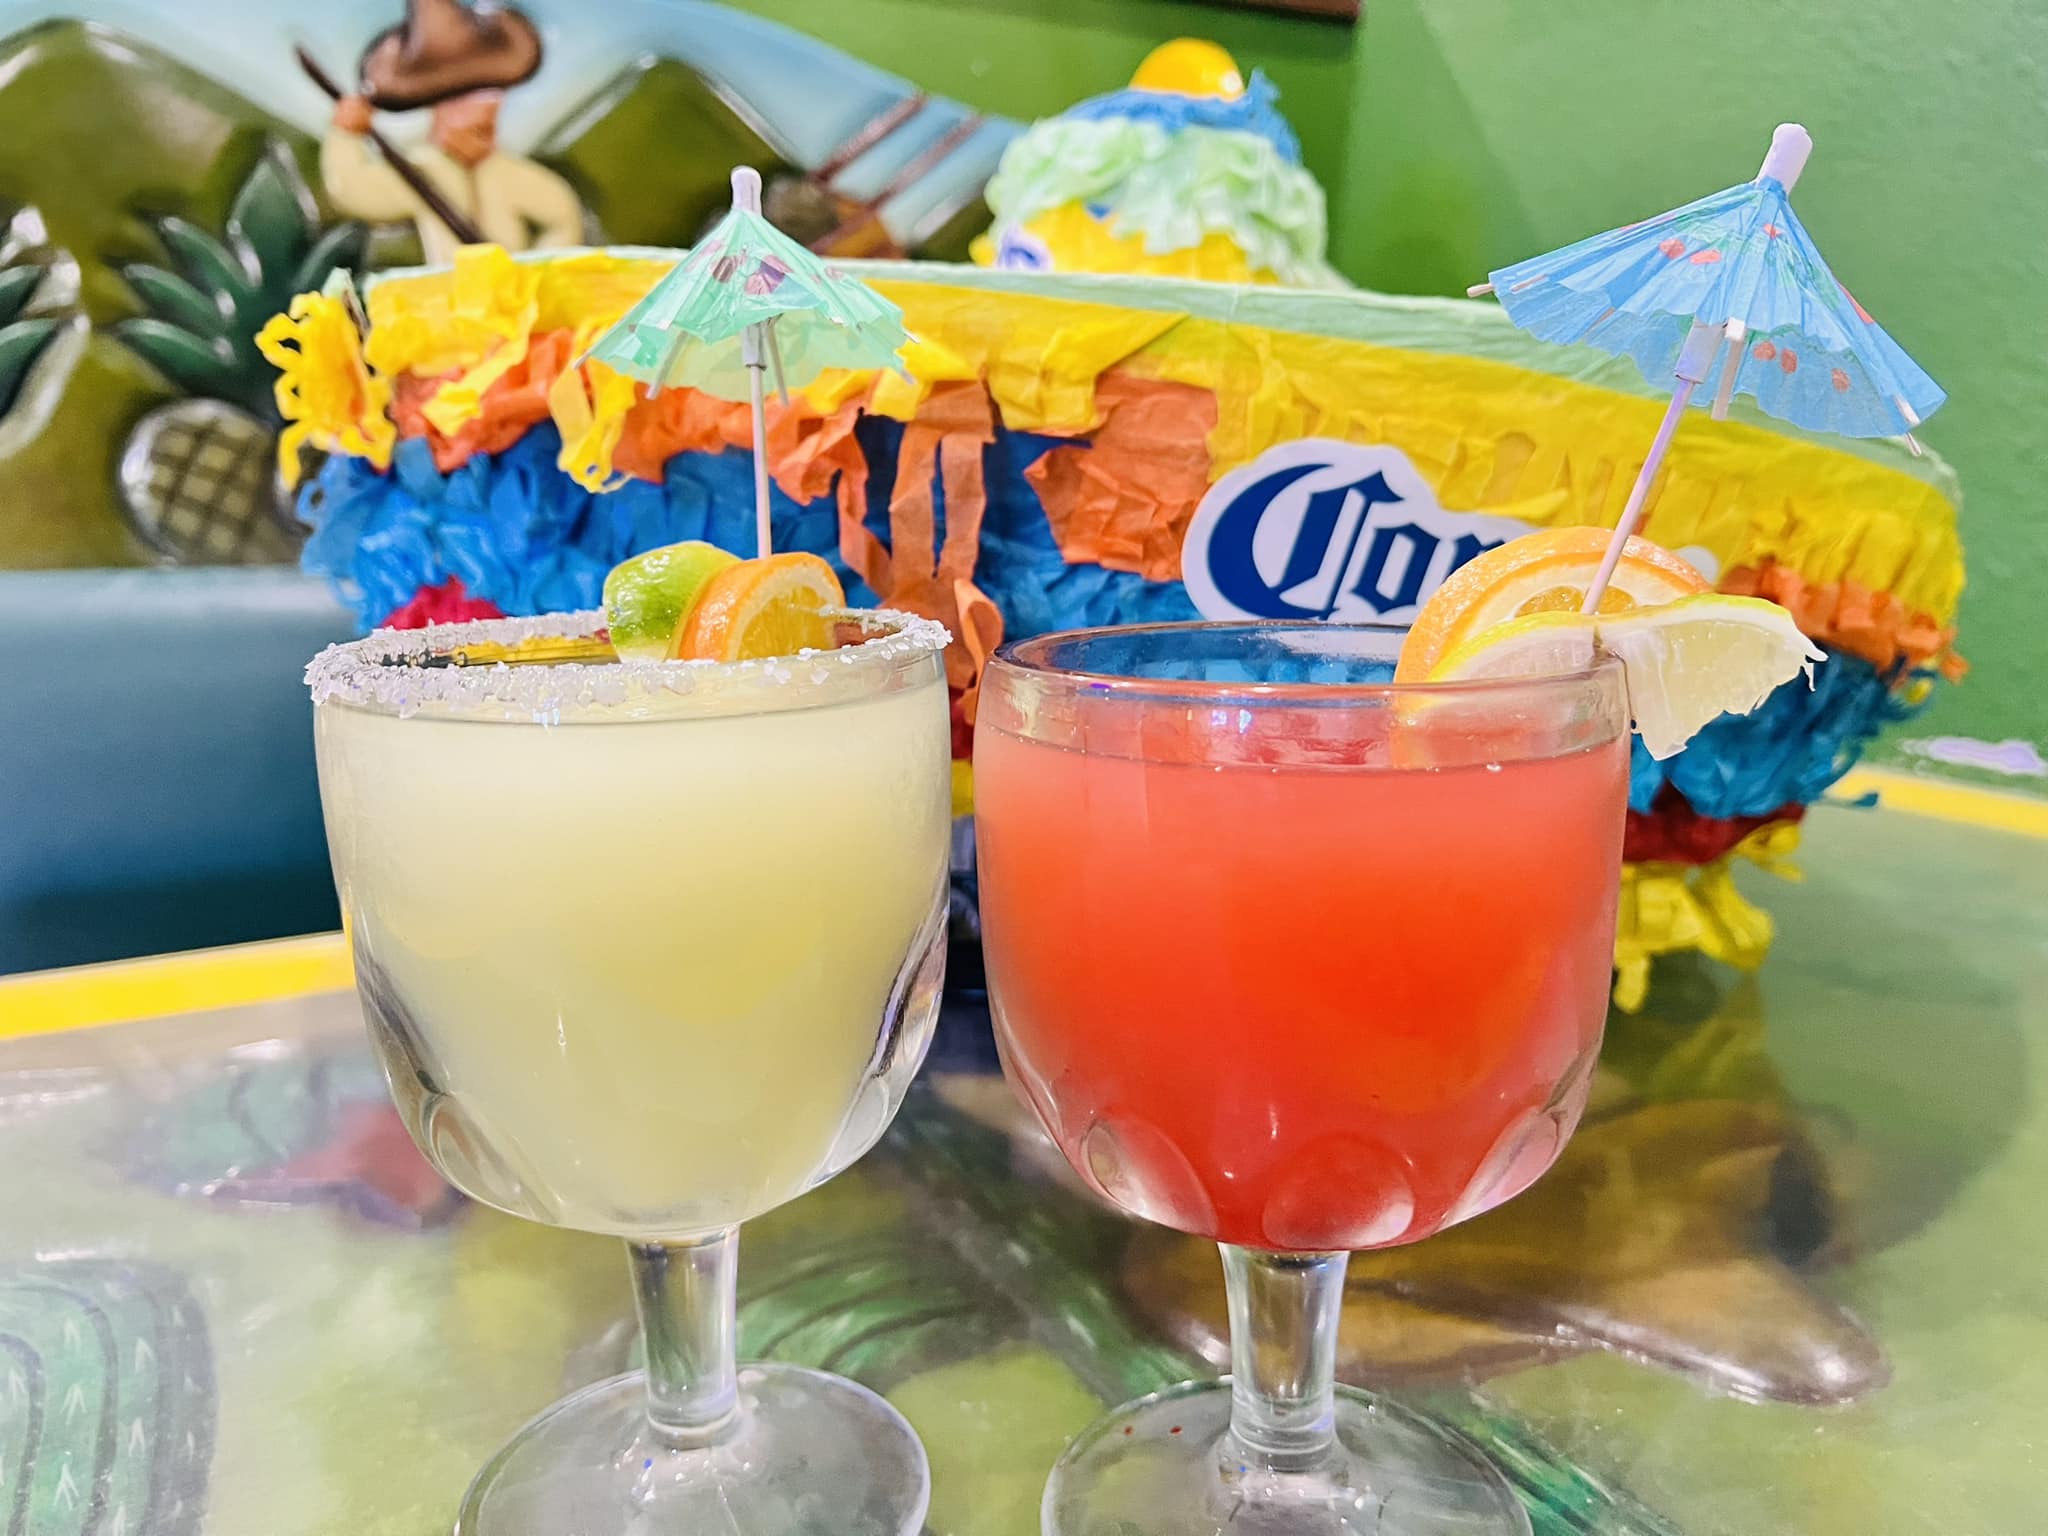 Somerset Margaritas, Daquiris, and cold beers